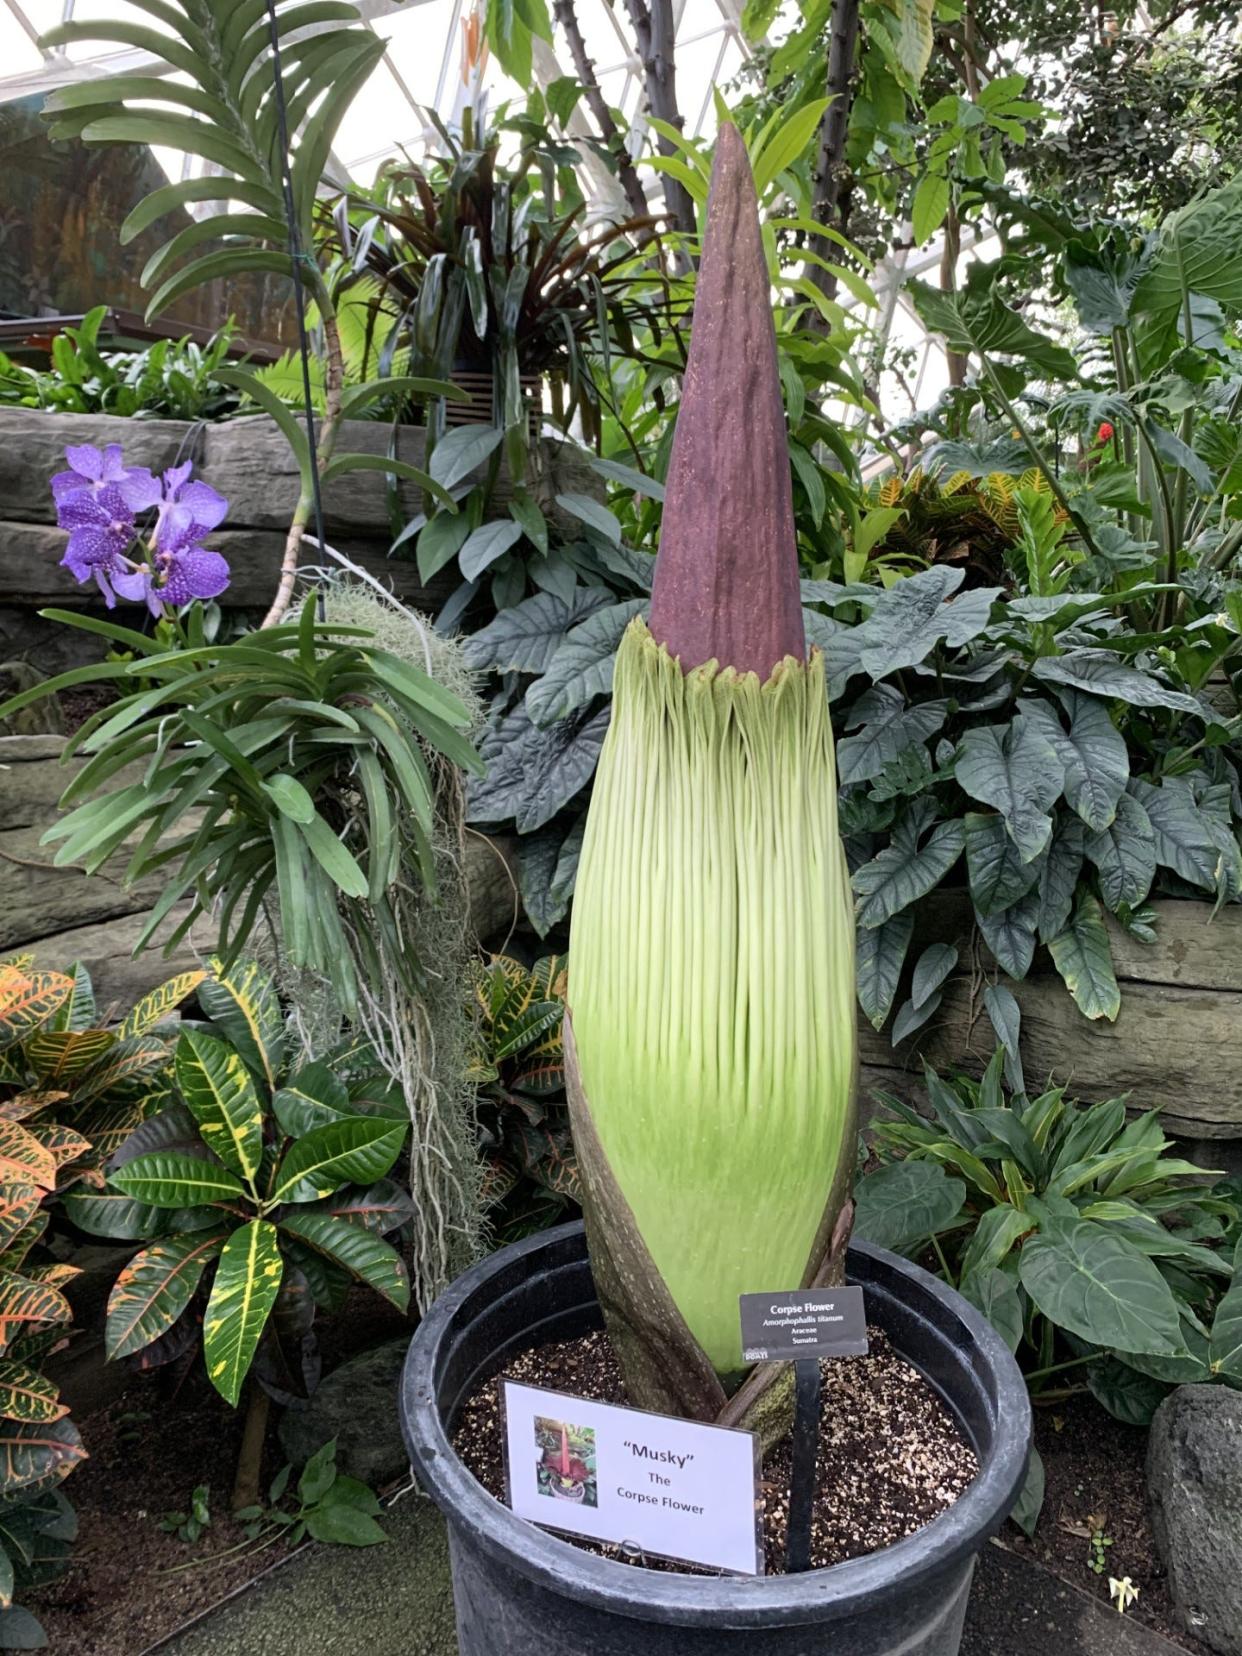 A stinky corpse flower nicknamed "Musky" is on the verge of blooming at the Mitchell Park Domes. It is pictured Friday, July 14 before opening.